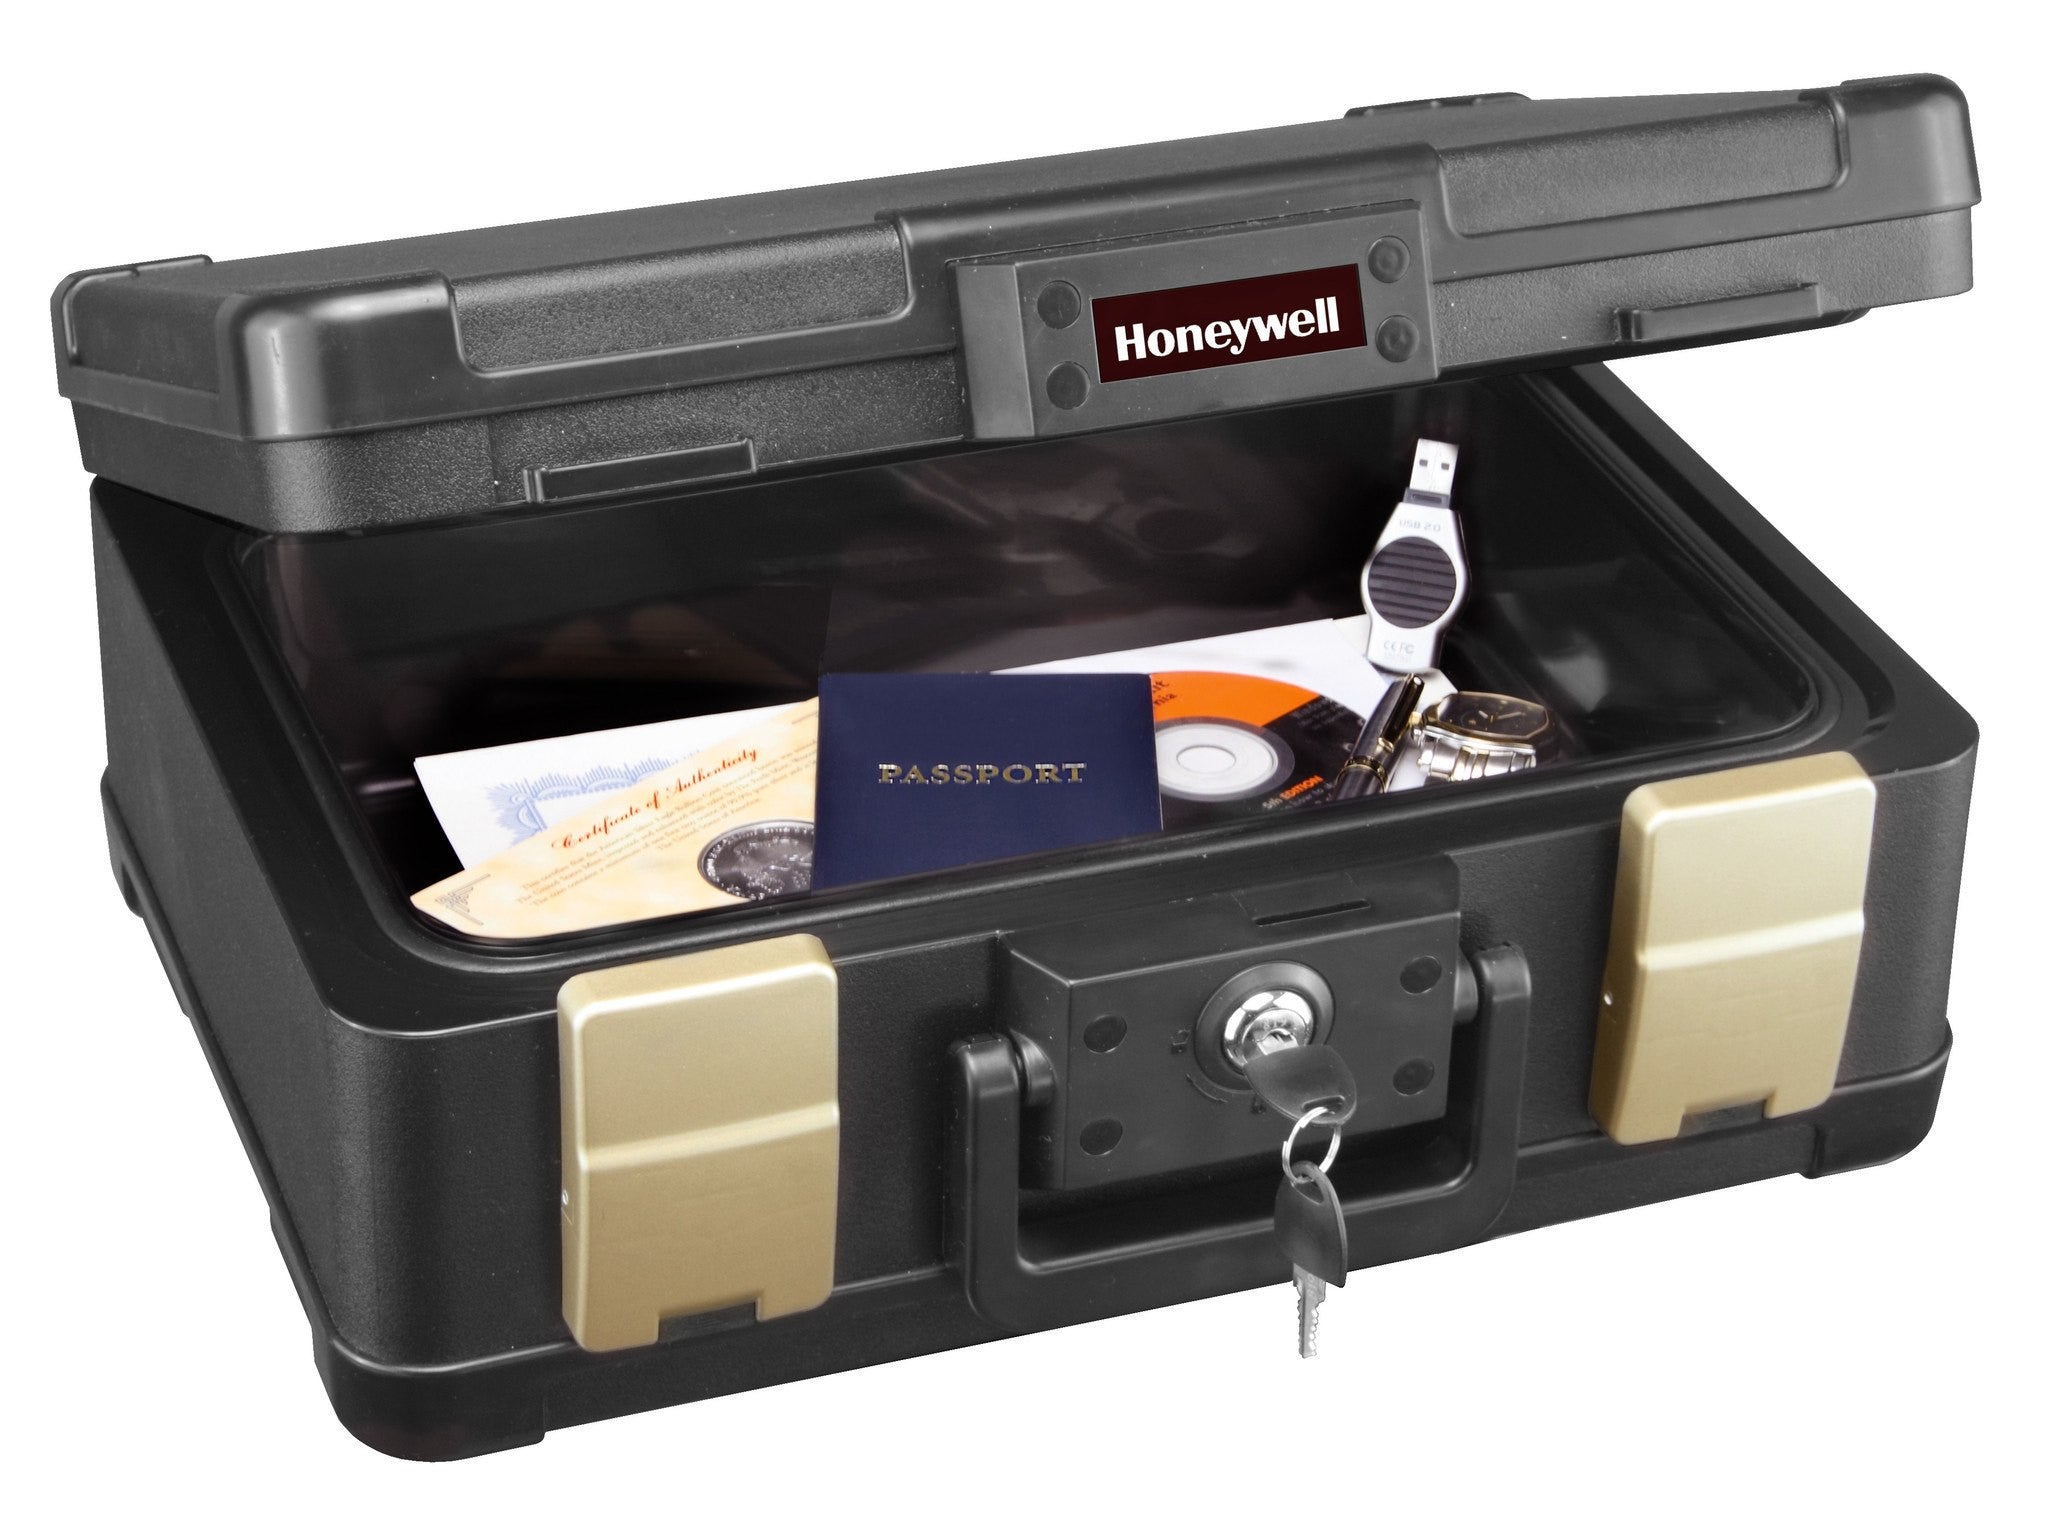 Honeywell 1103 Molded Fire/Water Chest